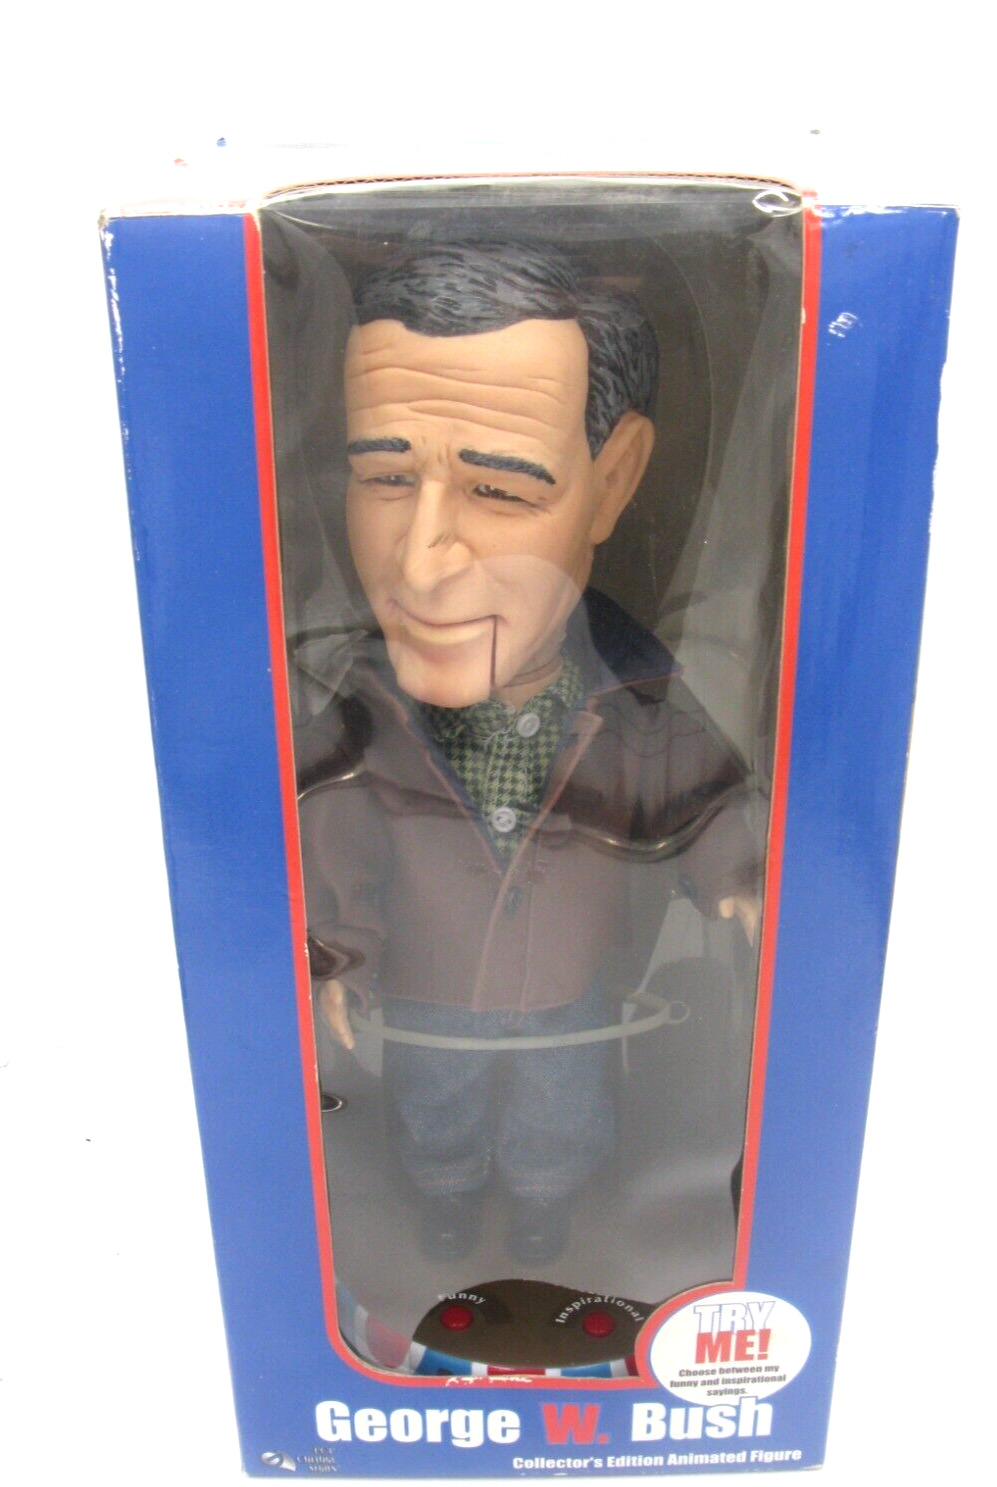 George W Bush Collector’s Edition Animated Figure Gemmy Pop Culture Talking Doll